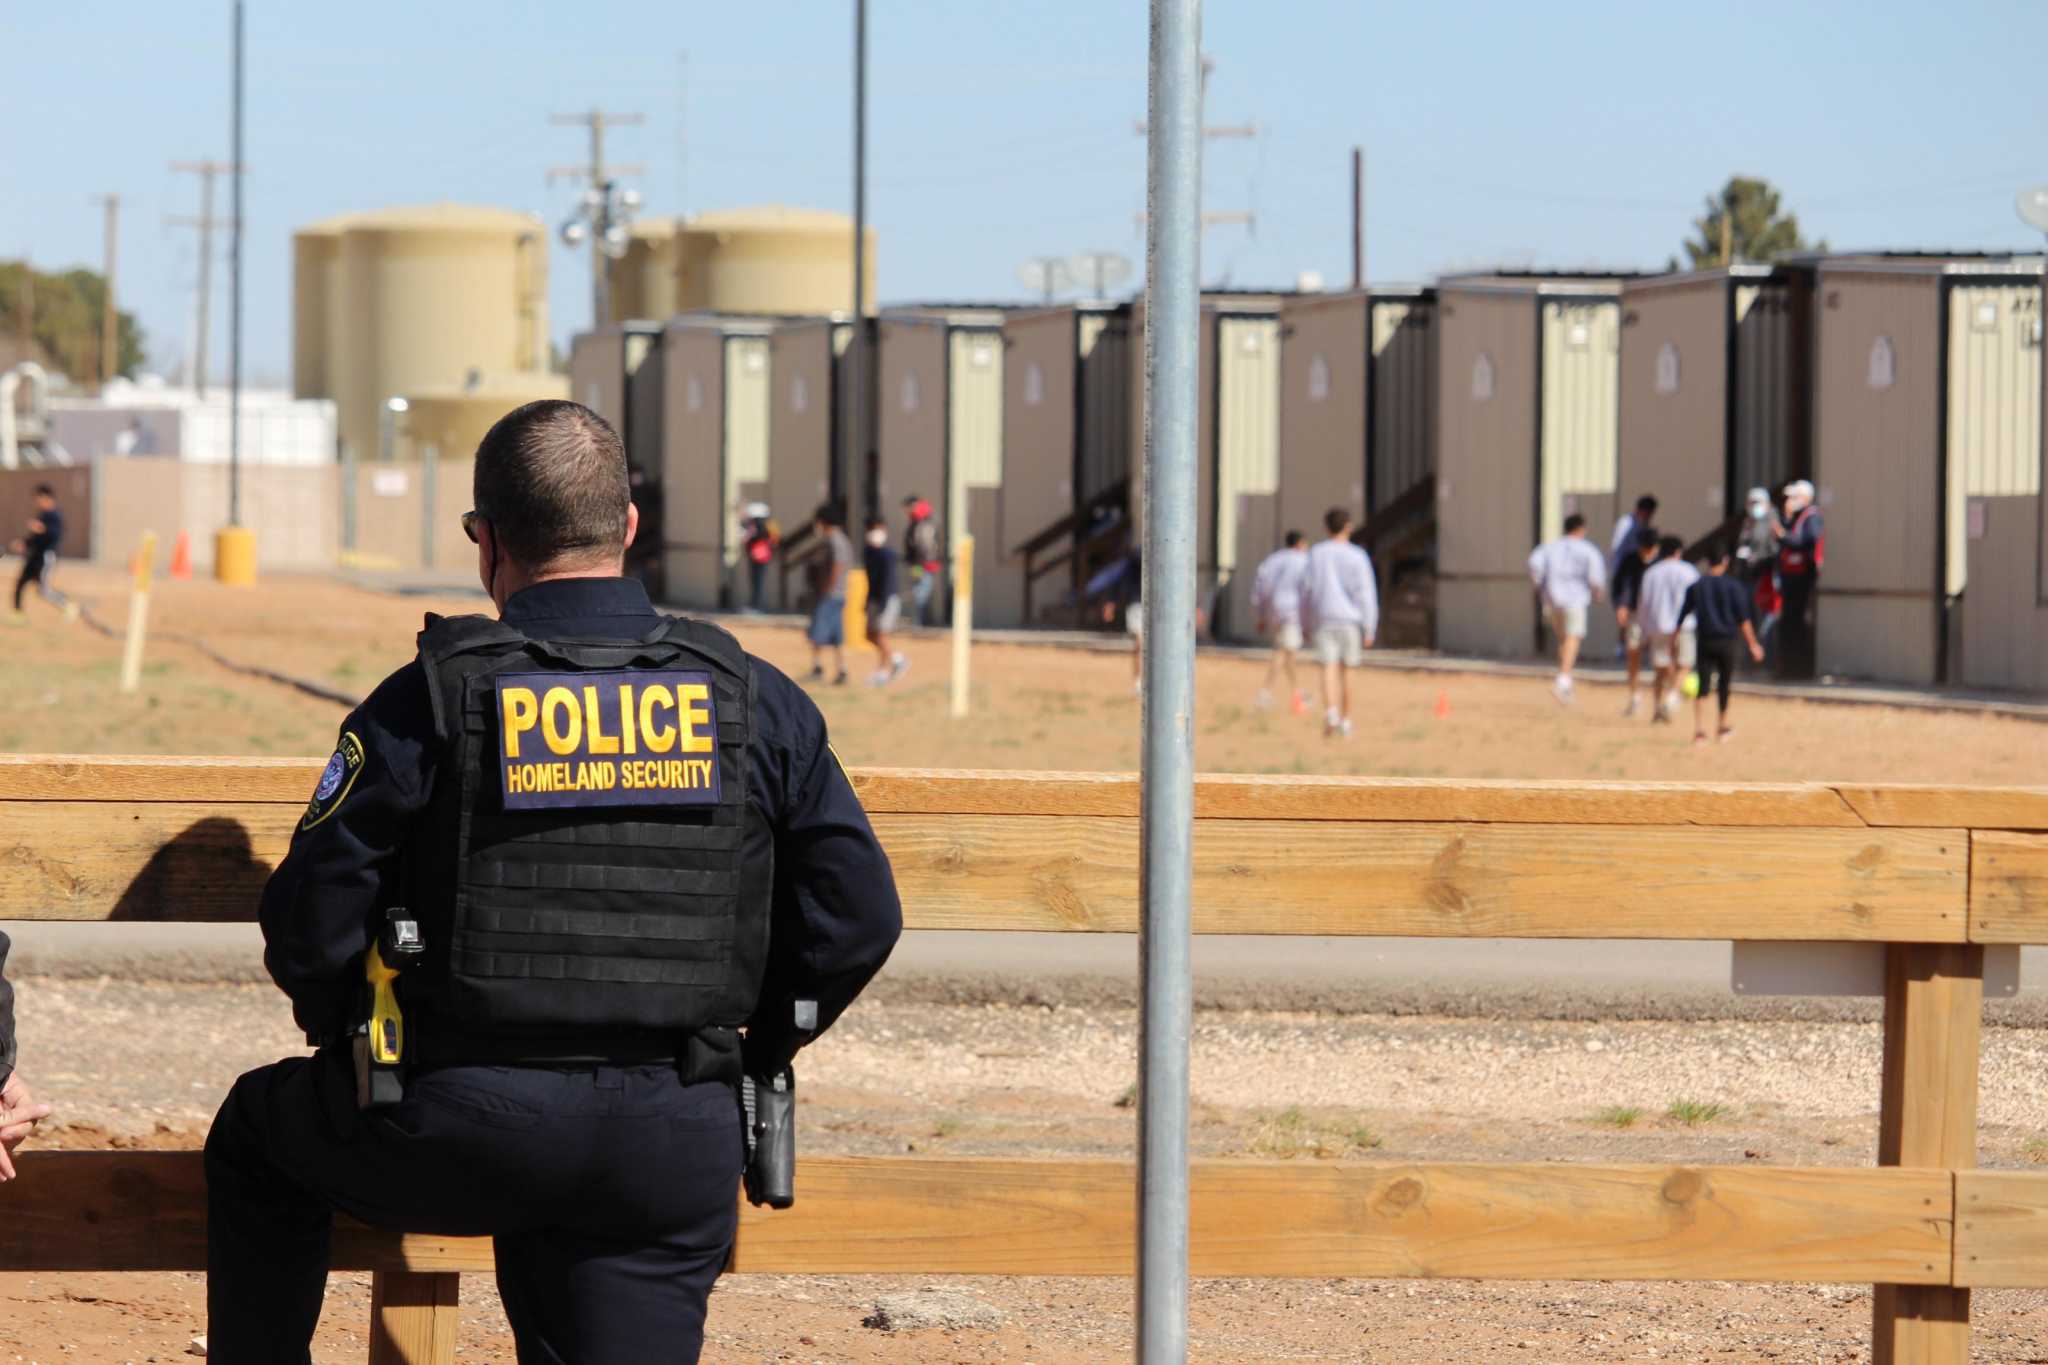 700 migrant children at Fort Bliss went weeks without help